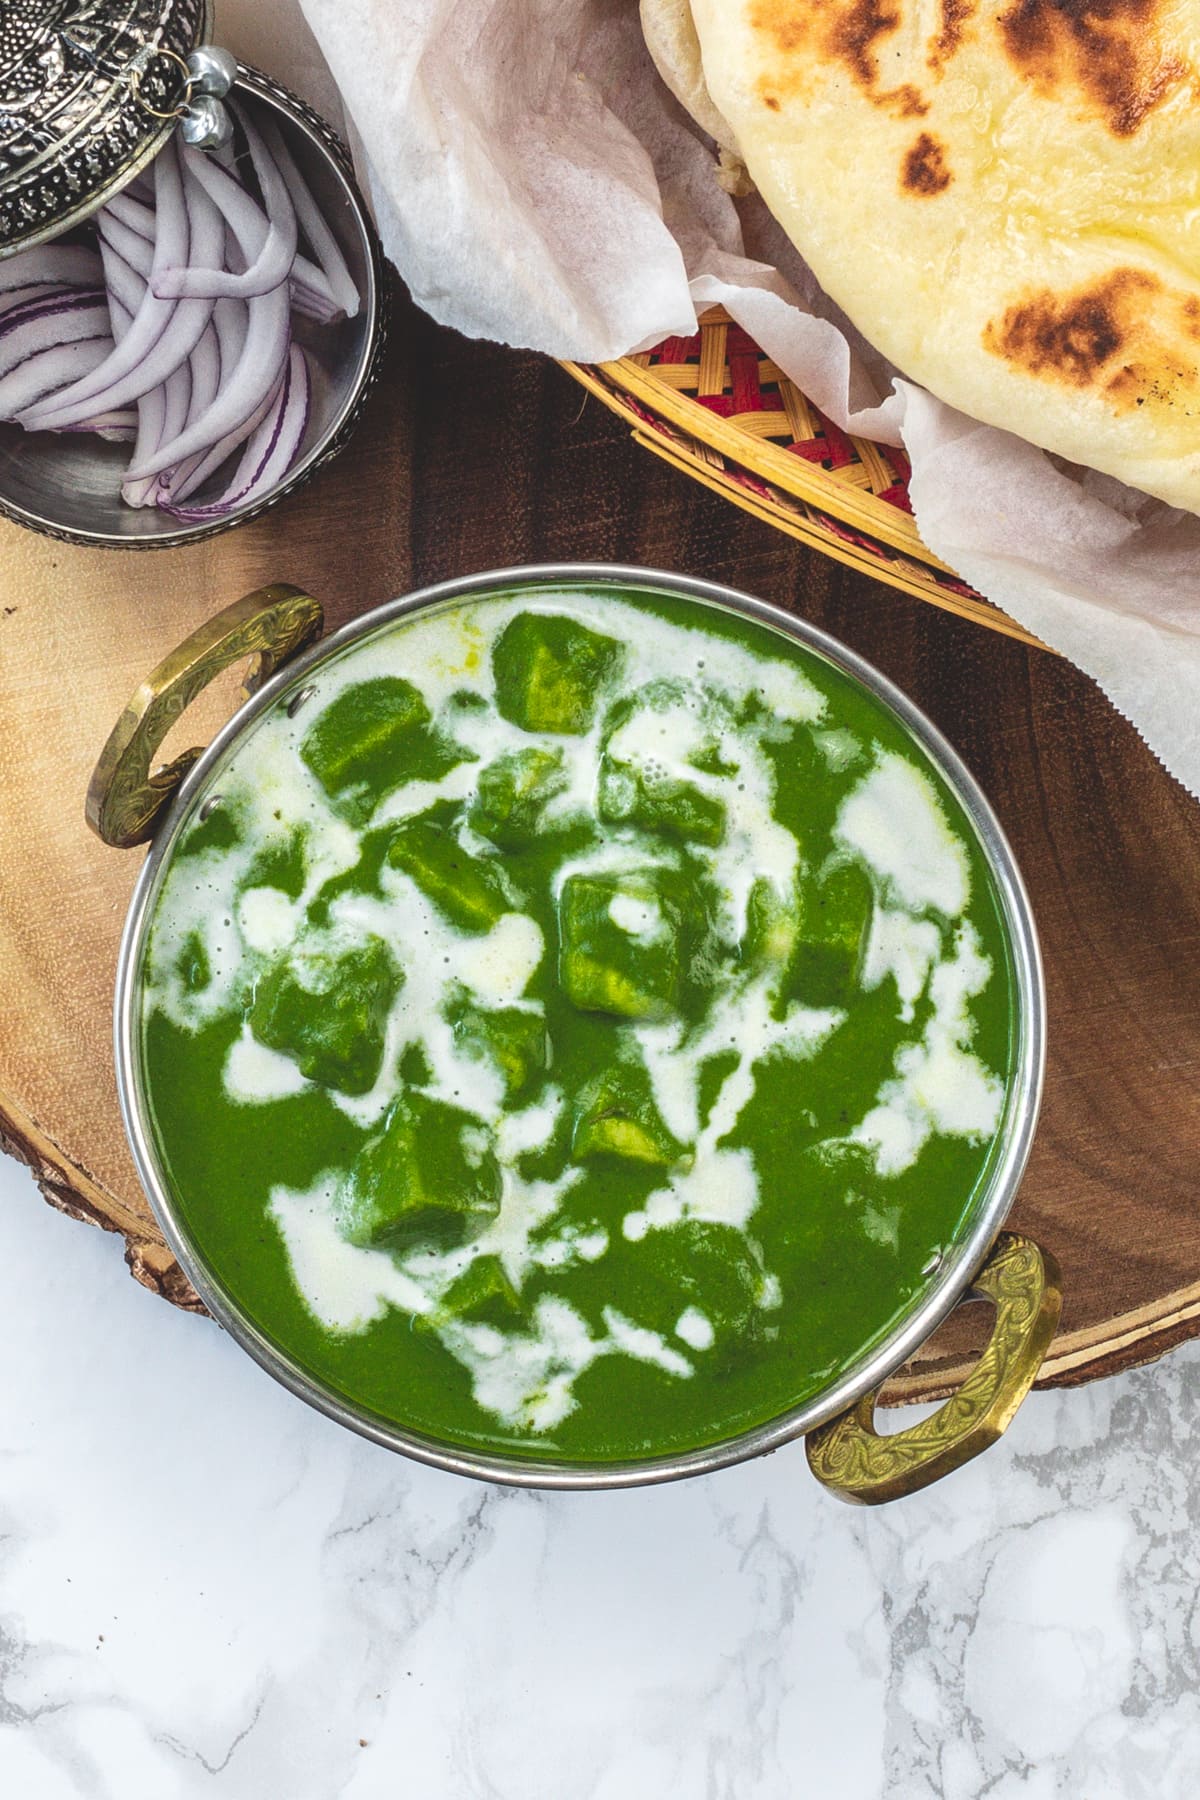 Top view of palak paneer garnished with cream, served with naan and onions.